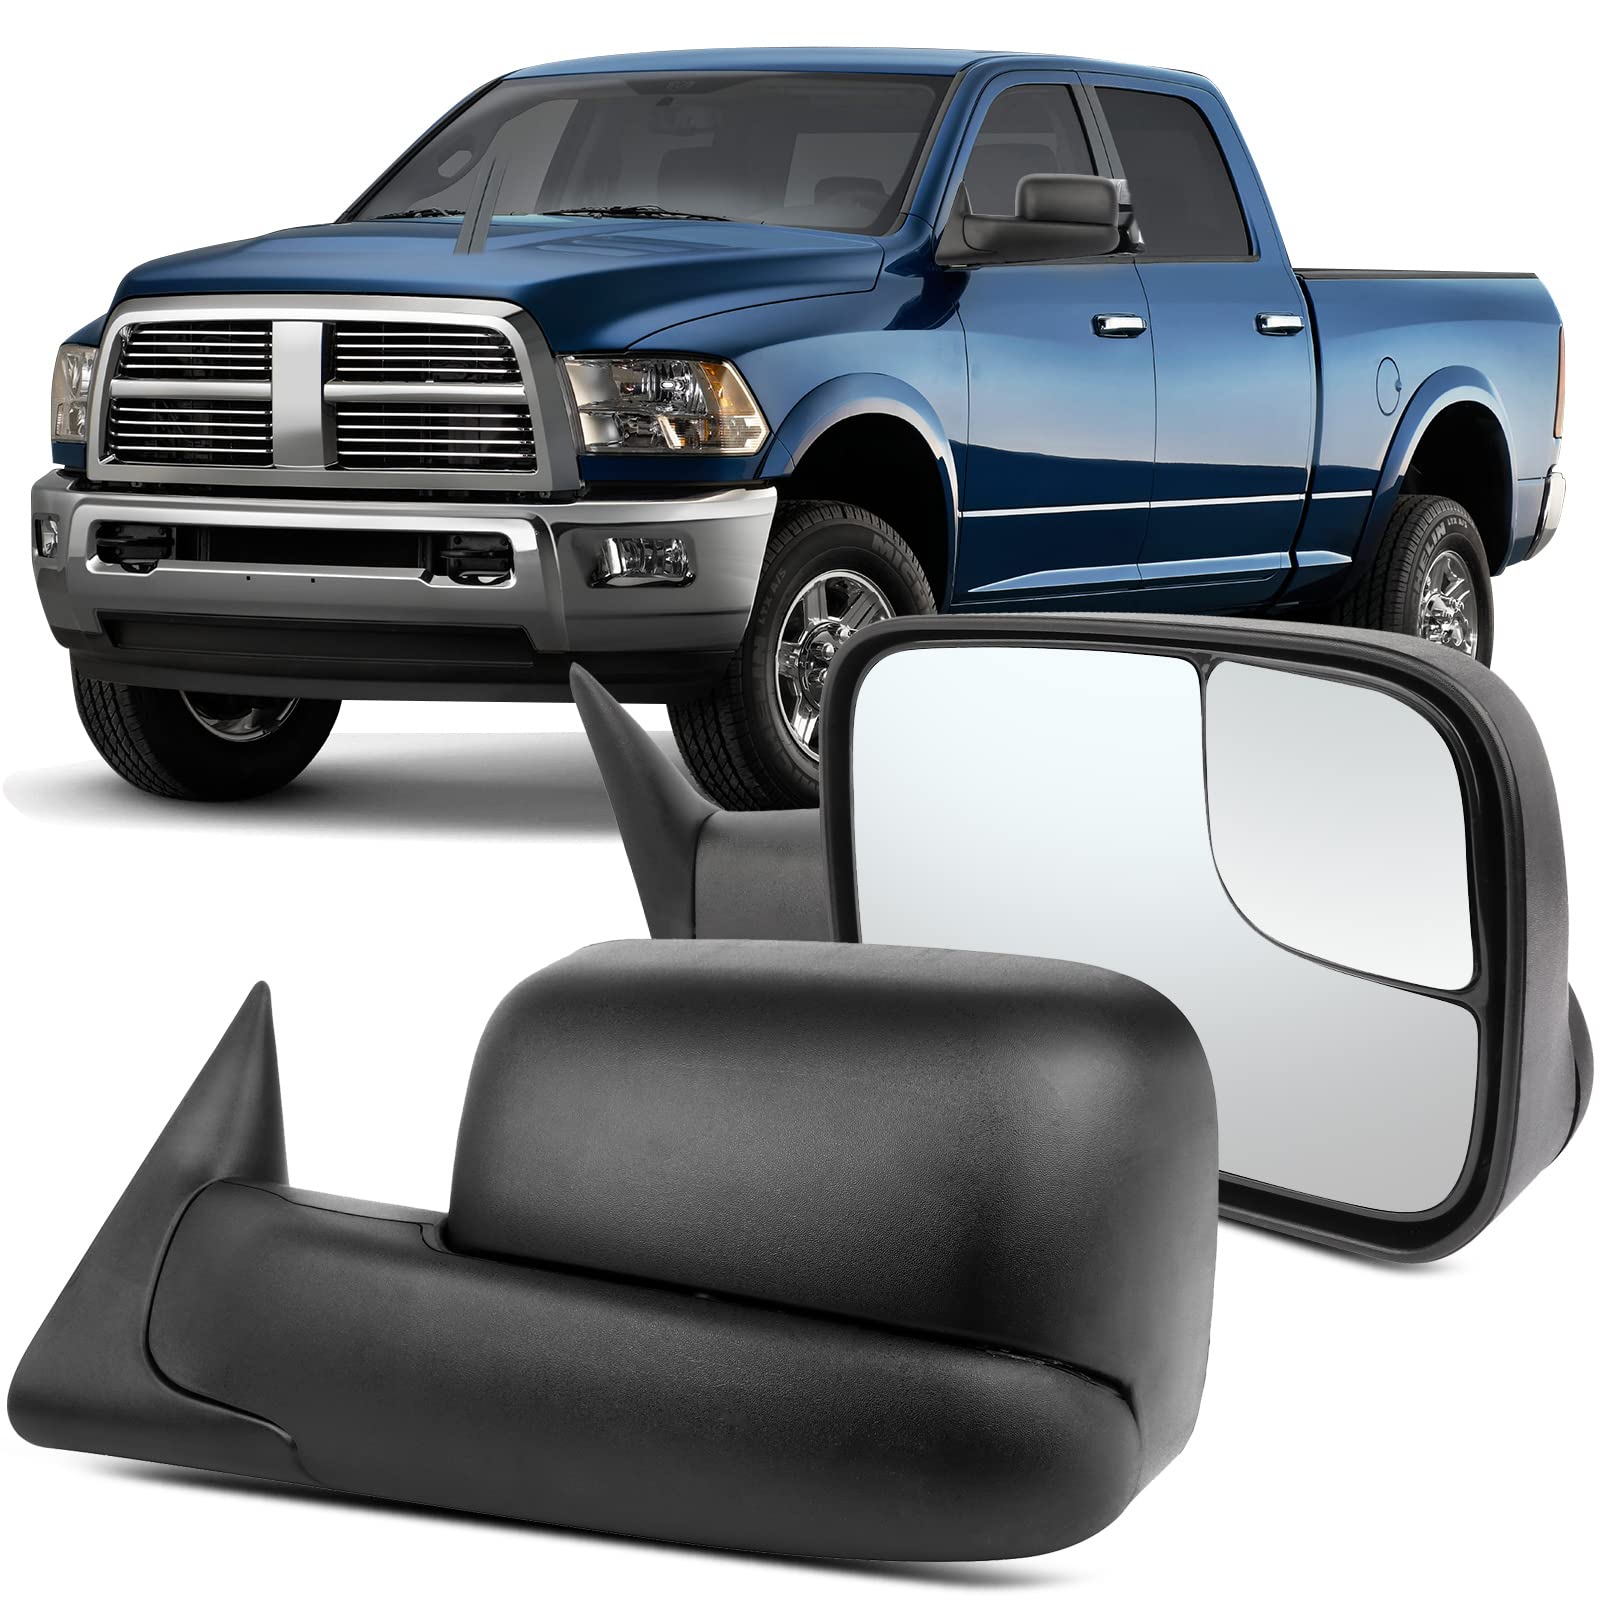 OCPTY Towing Mirror with Manual Adjusted Right Side Tow Mirror Compatible with 1994-2001 for DODGE for Ram 1500 1994-2002 for DODGE for Ram 2500 3500 with Black Housing